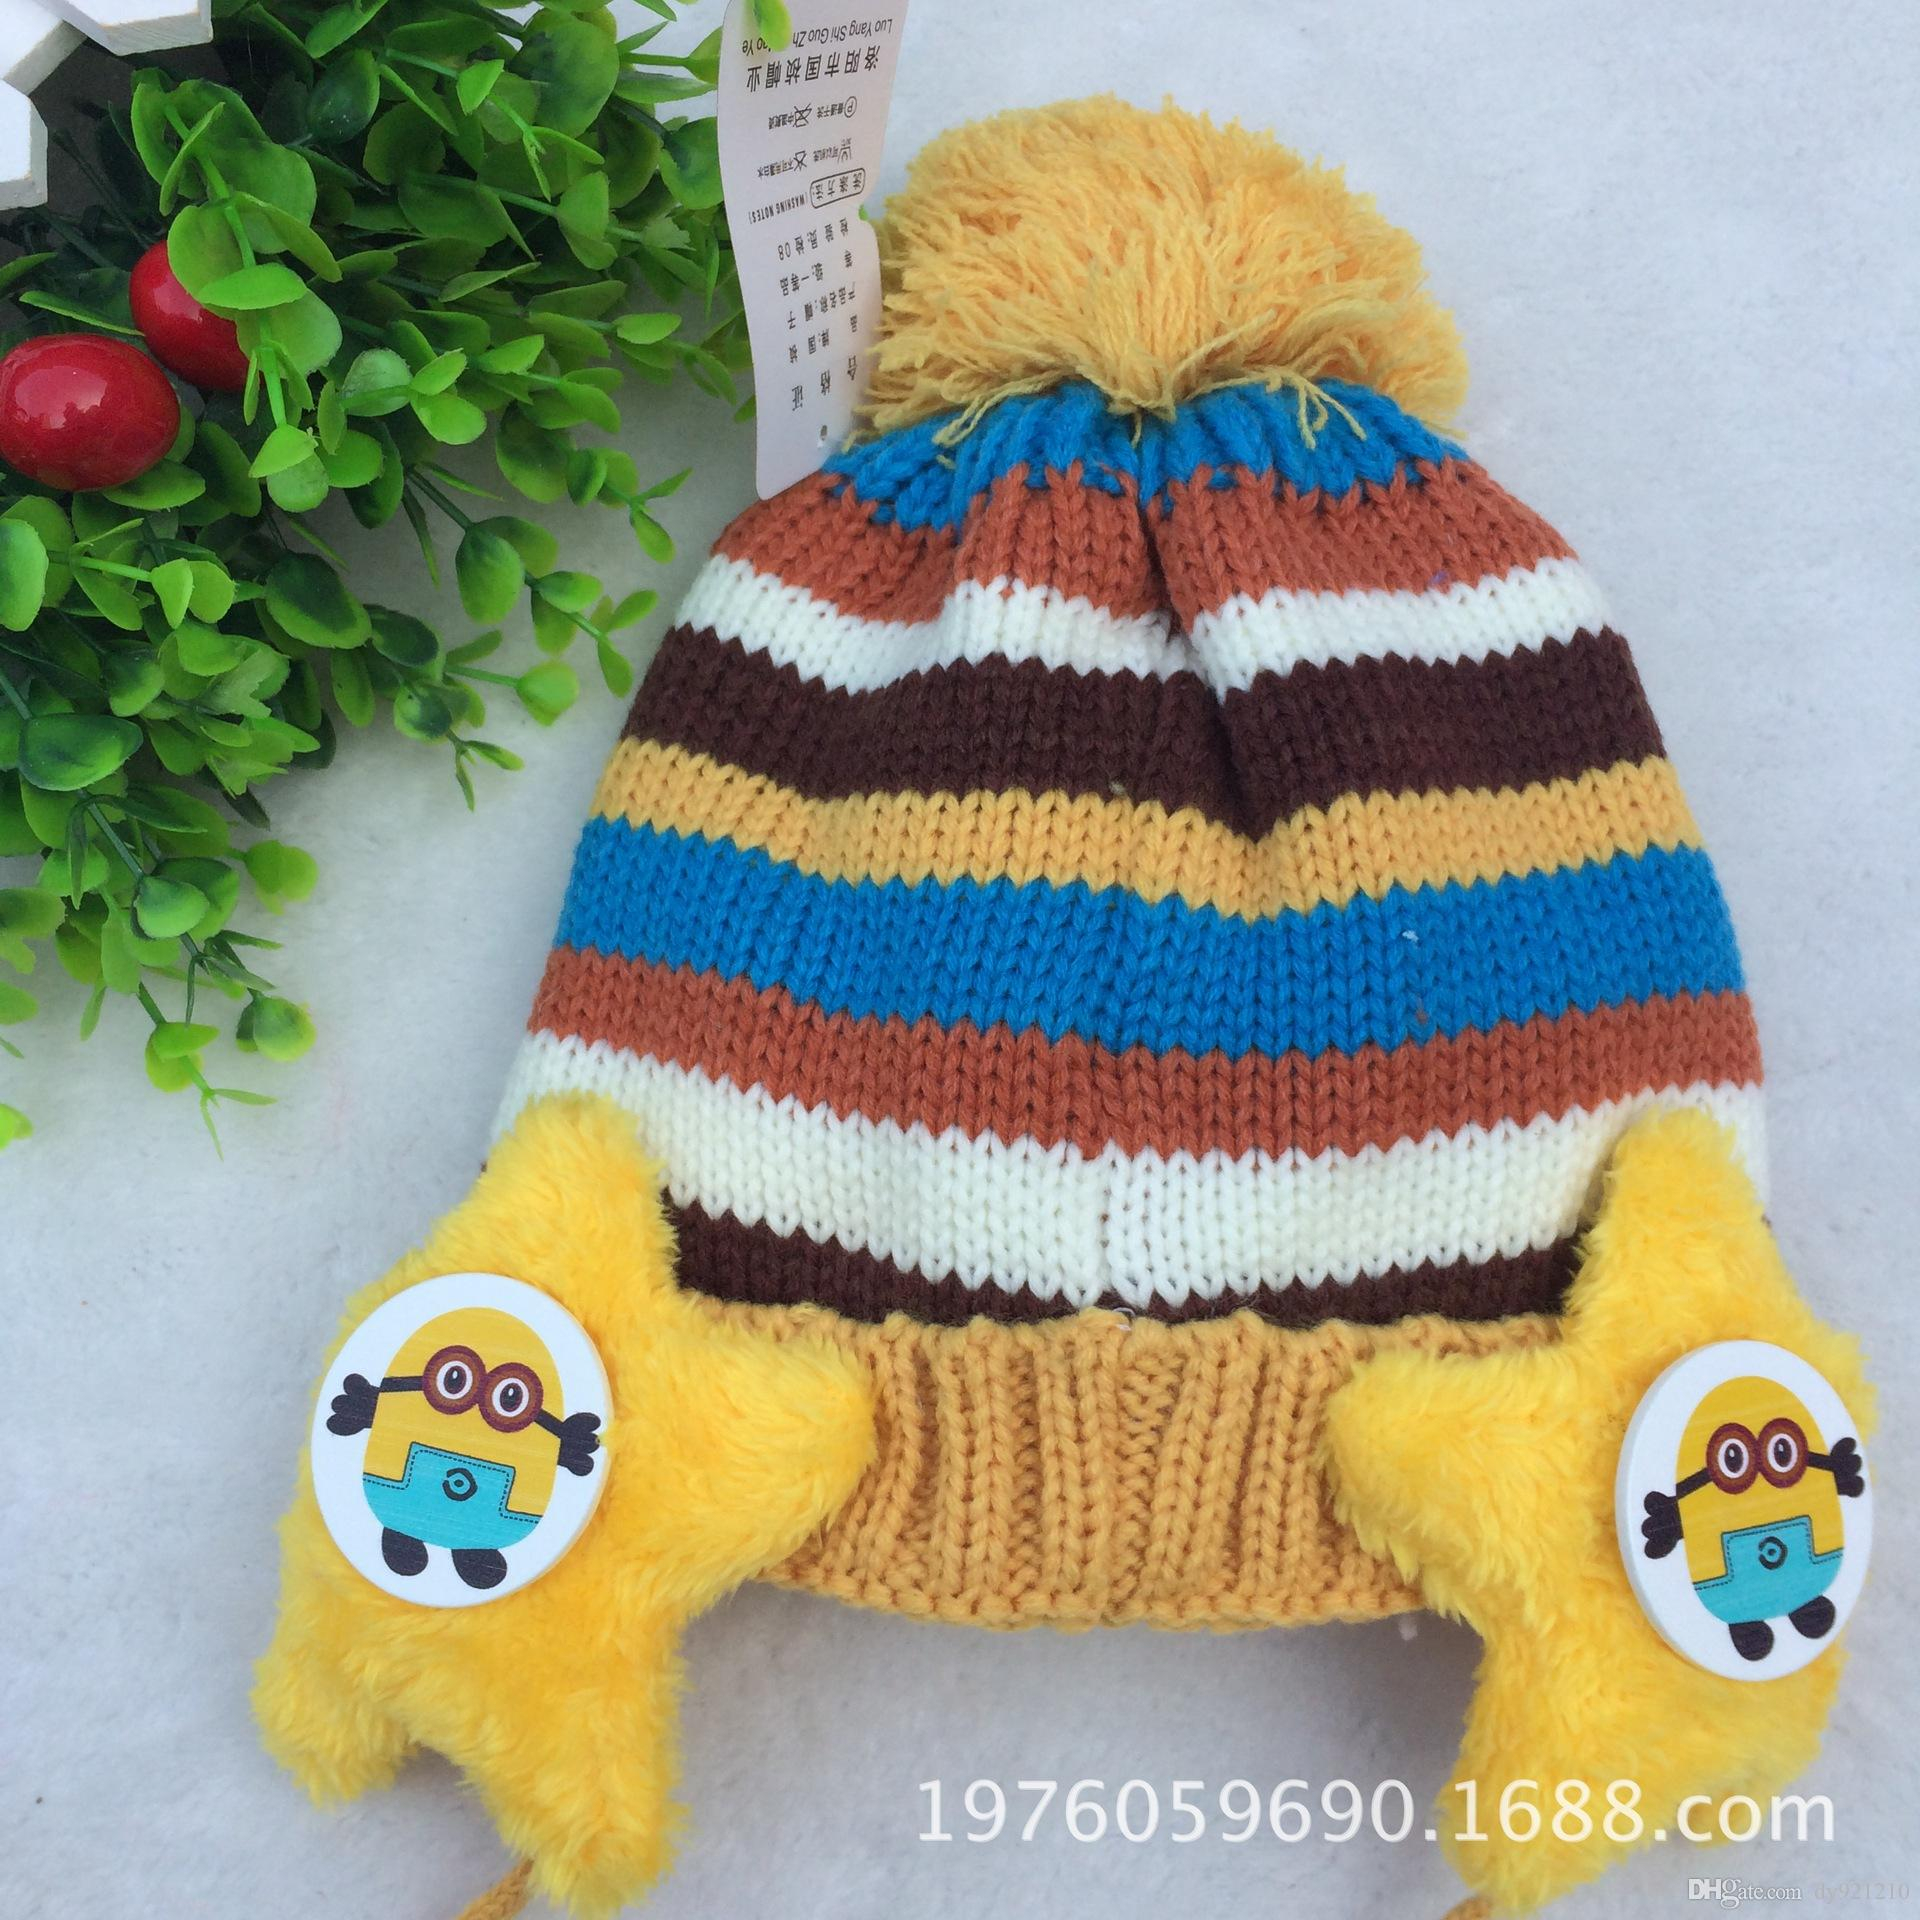 Knitting Patterns For Minion Hats Seoproductname